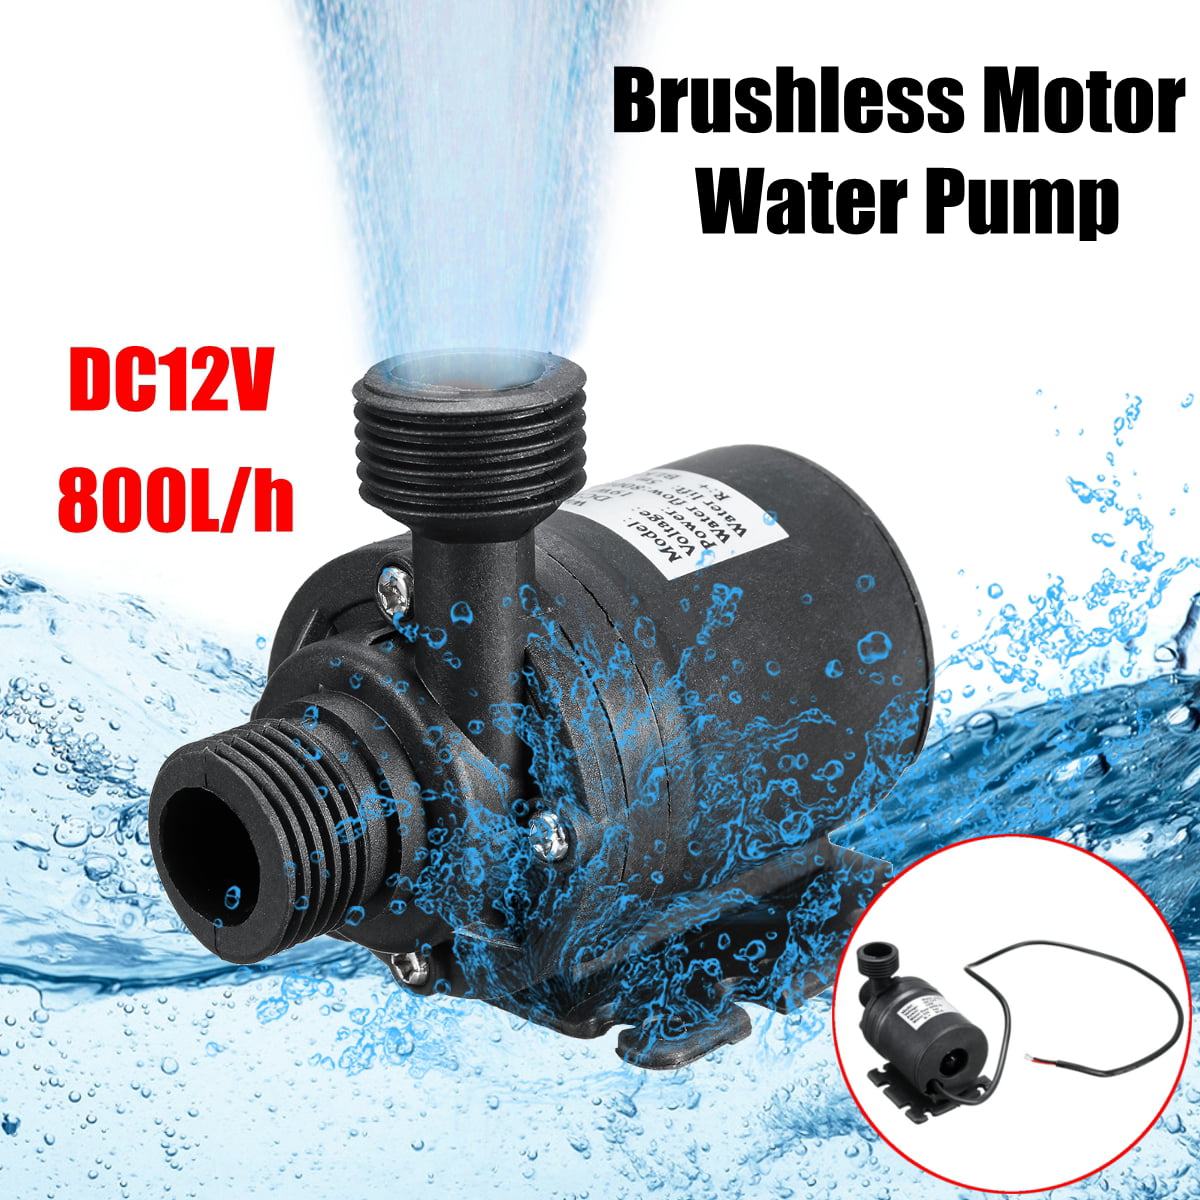 Water Pump DC 3-5V DC Brushless Small Submersible Motor Pump Garden Pond 